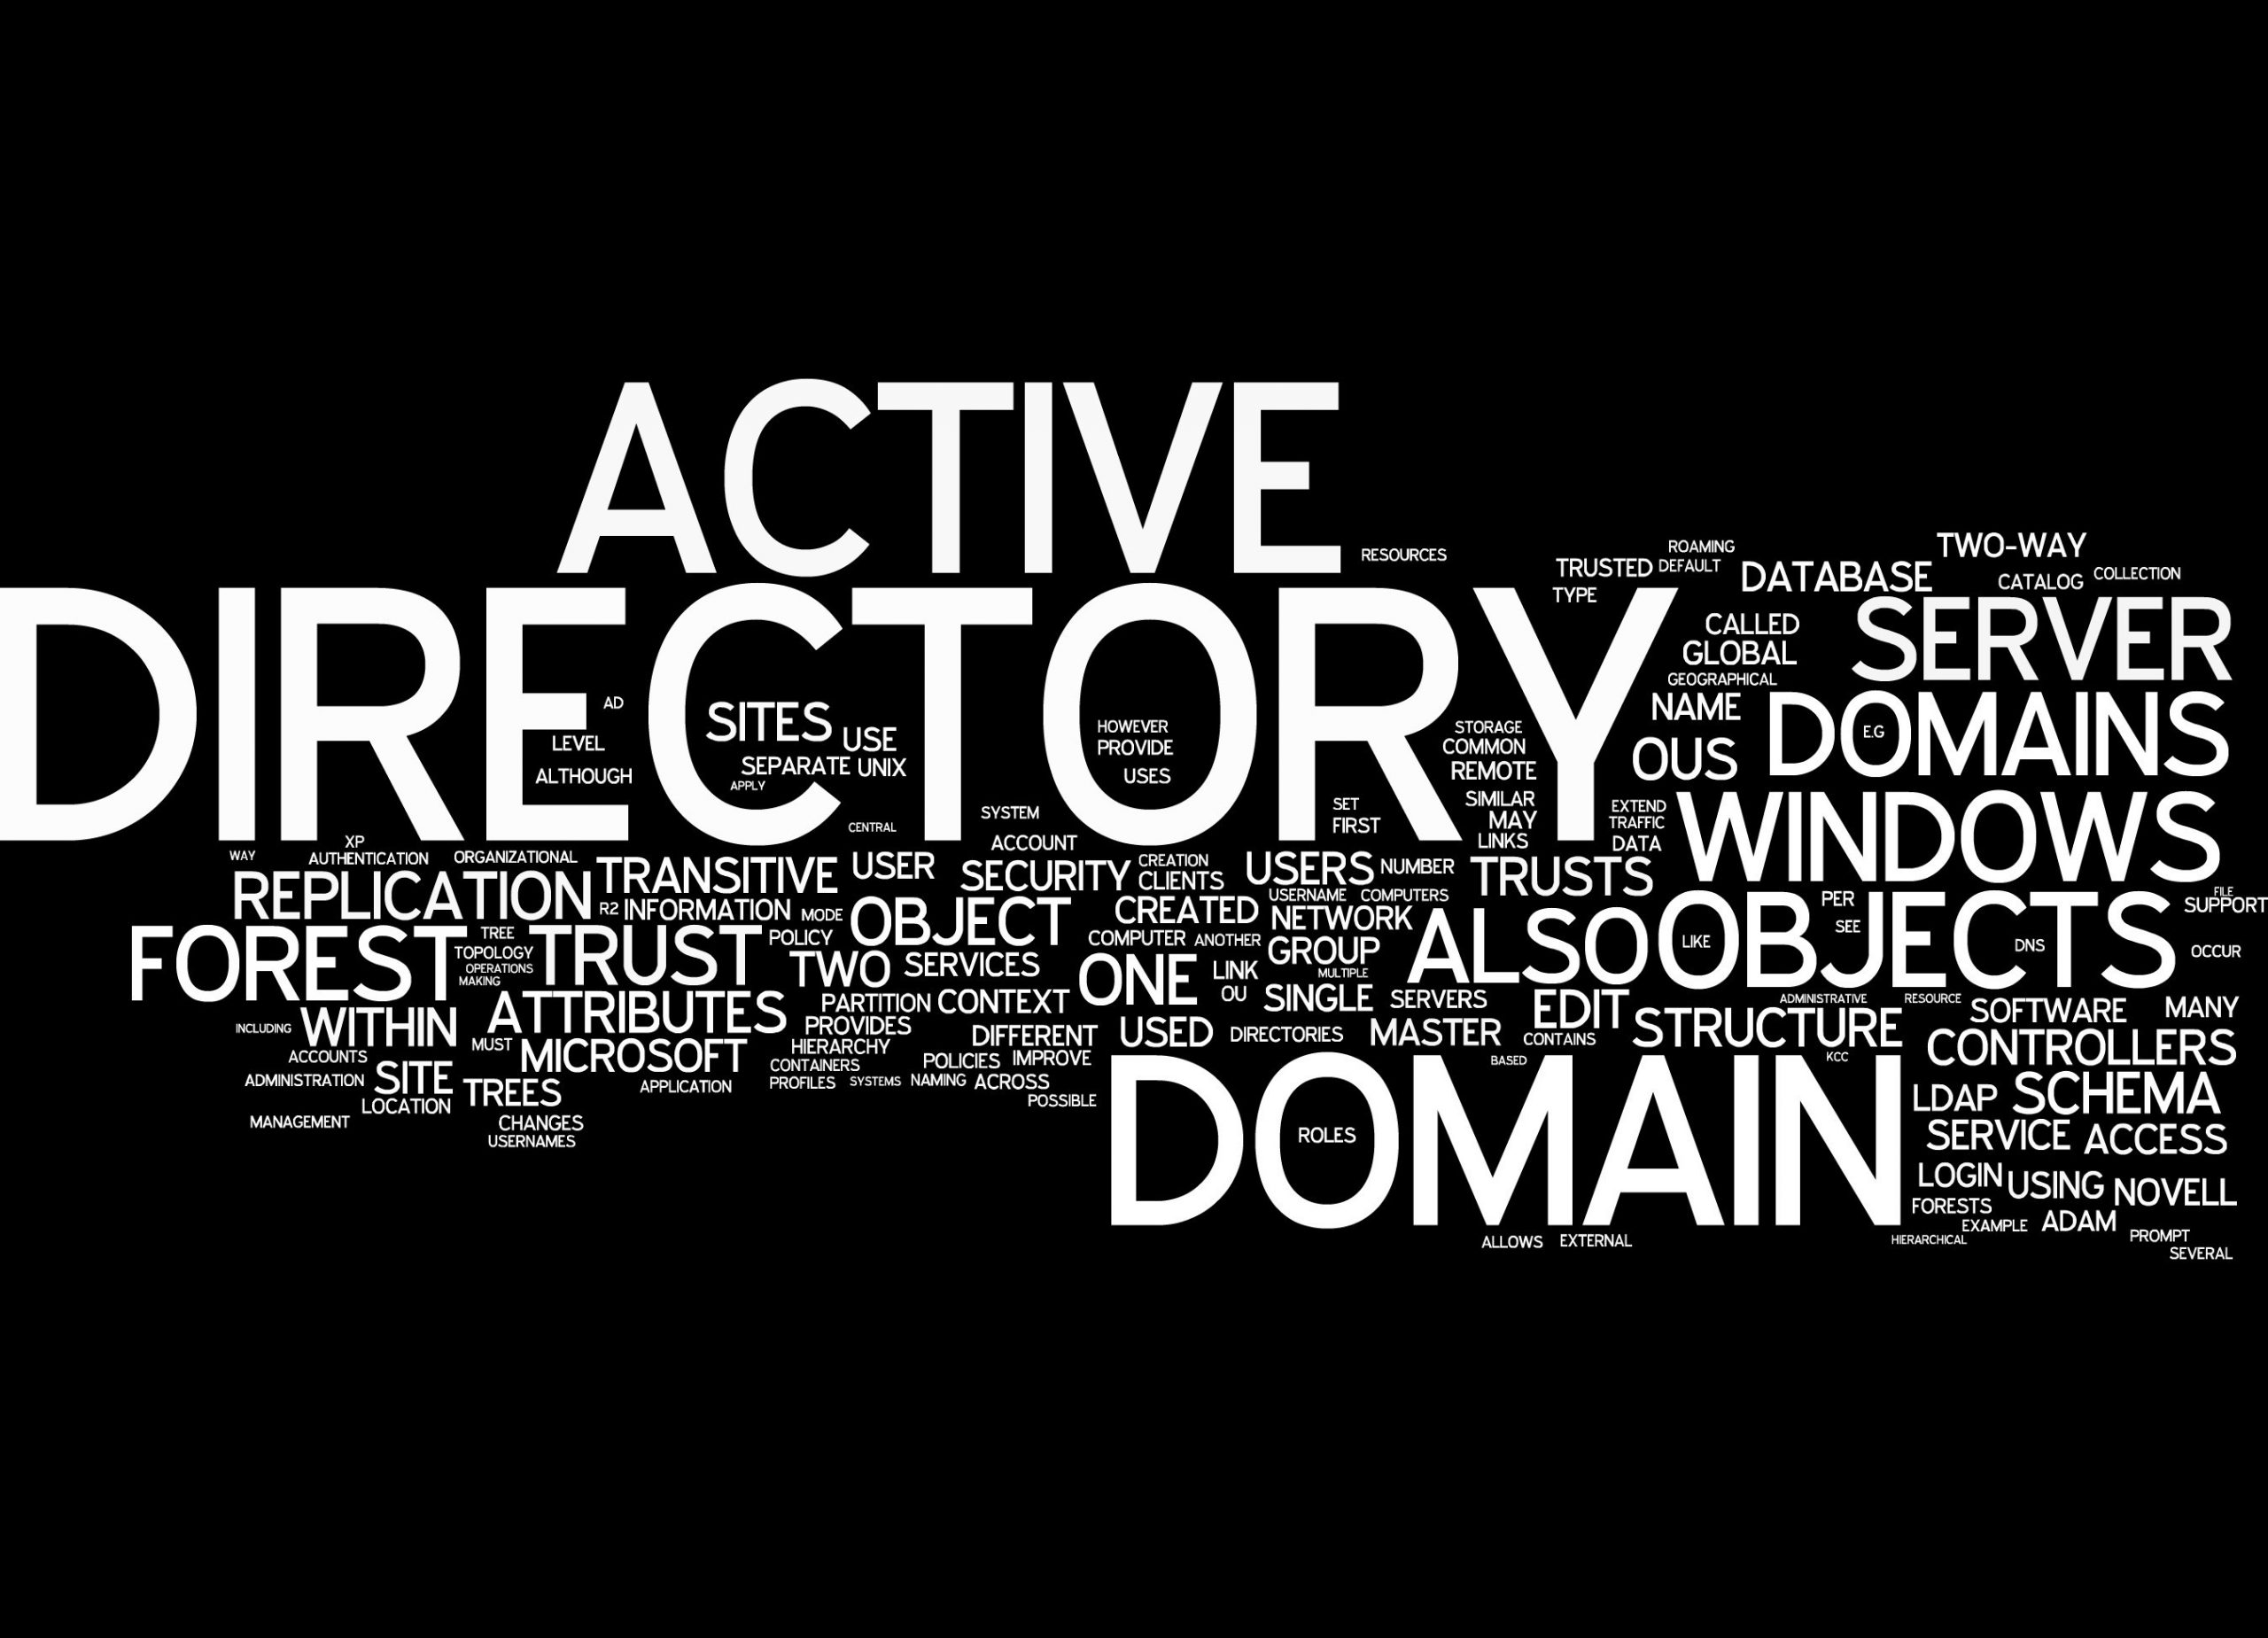 Active Directory Security Best Practices Includes Monitoring for Signs of Compromise